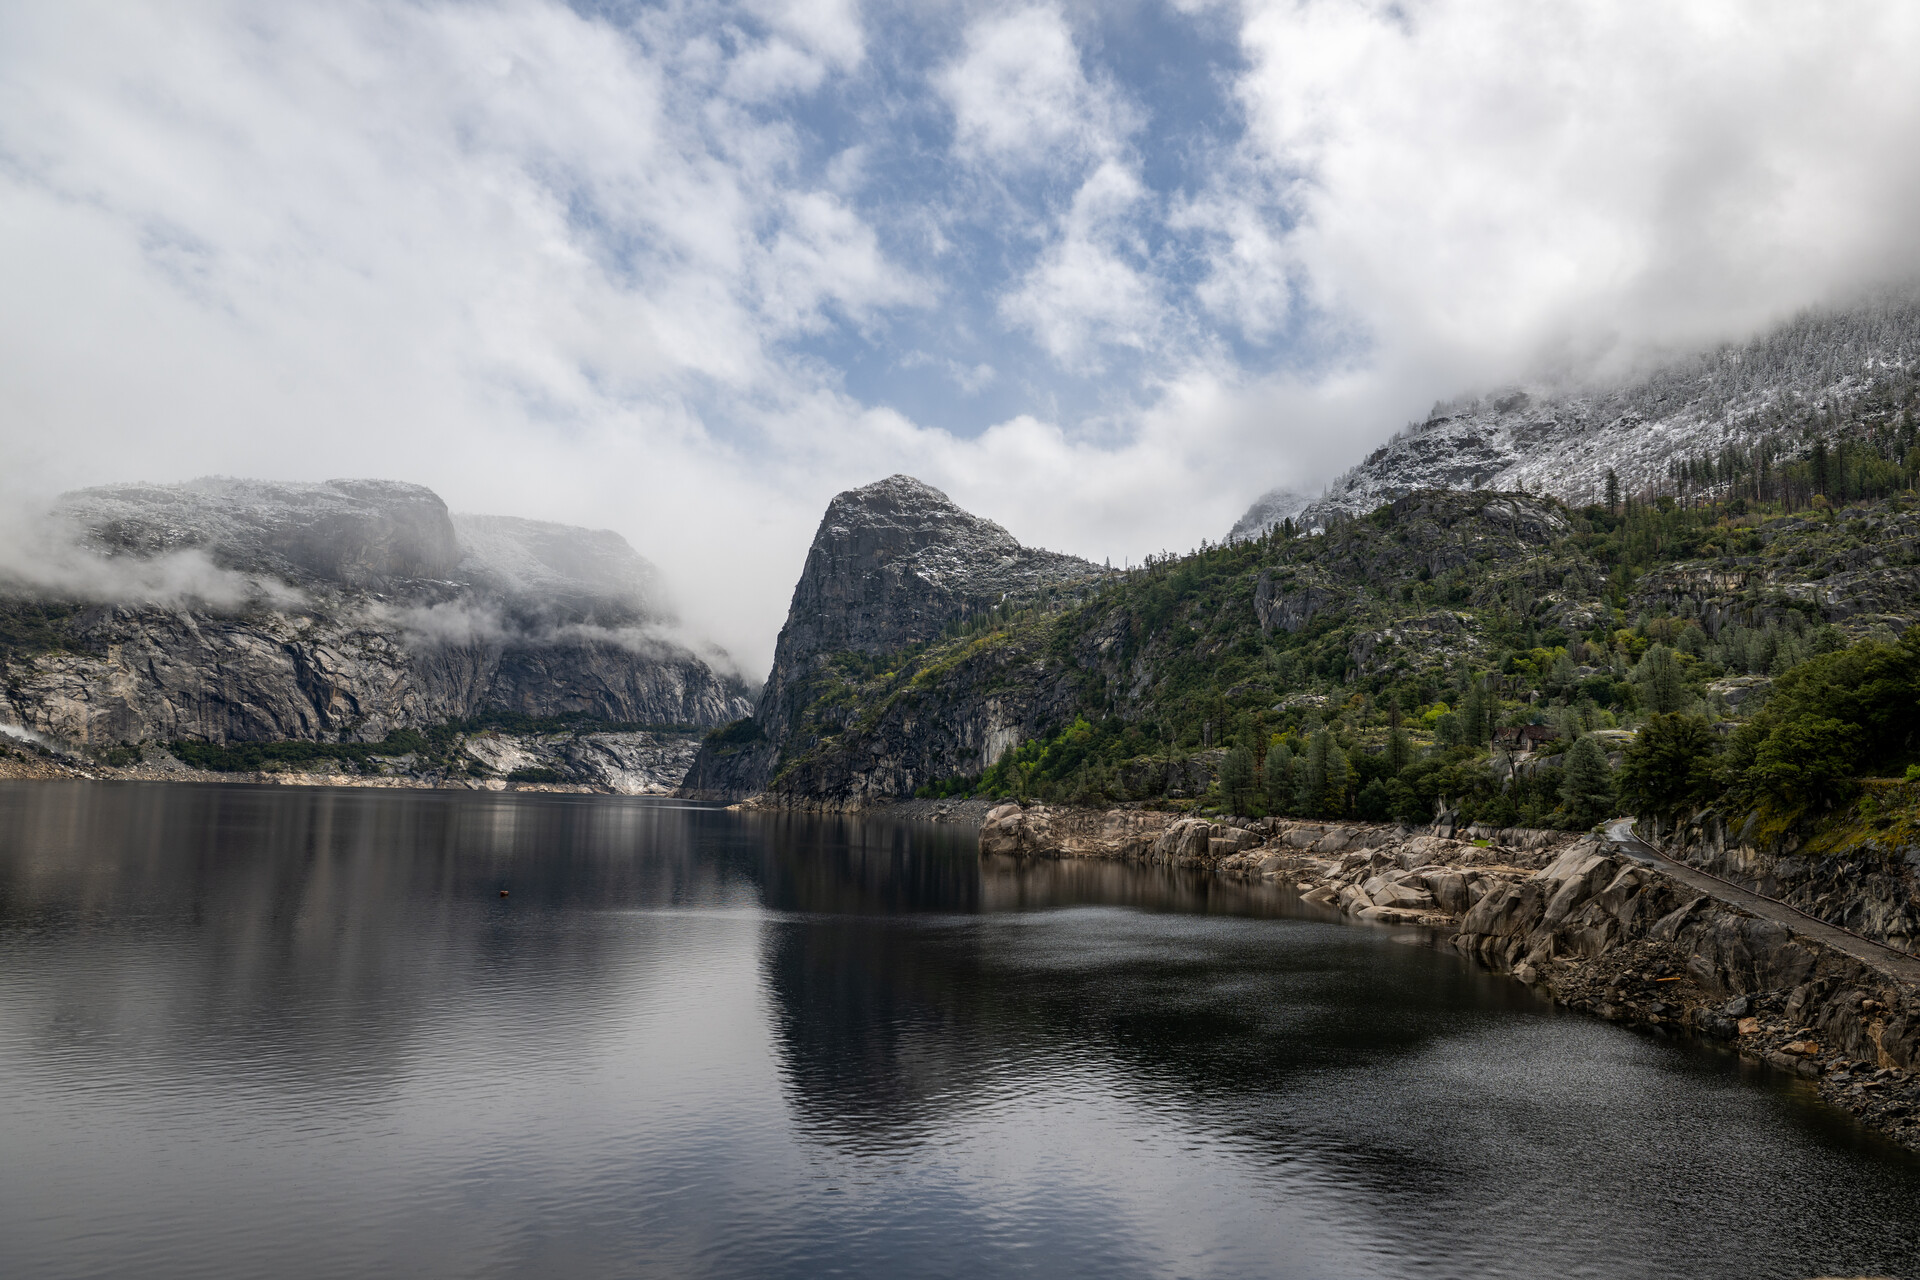 A sweeping panorama photograph shows a massive lake reflecting the shapes of steep rounded granite peaks rising above it, with alpine forest also visible